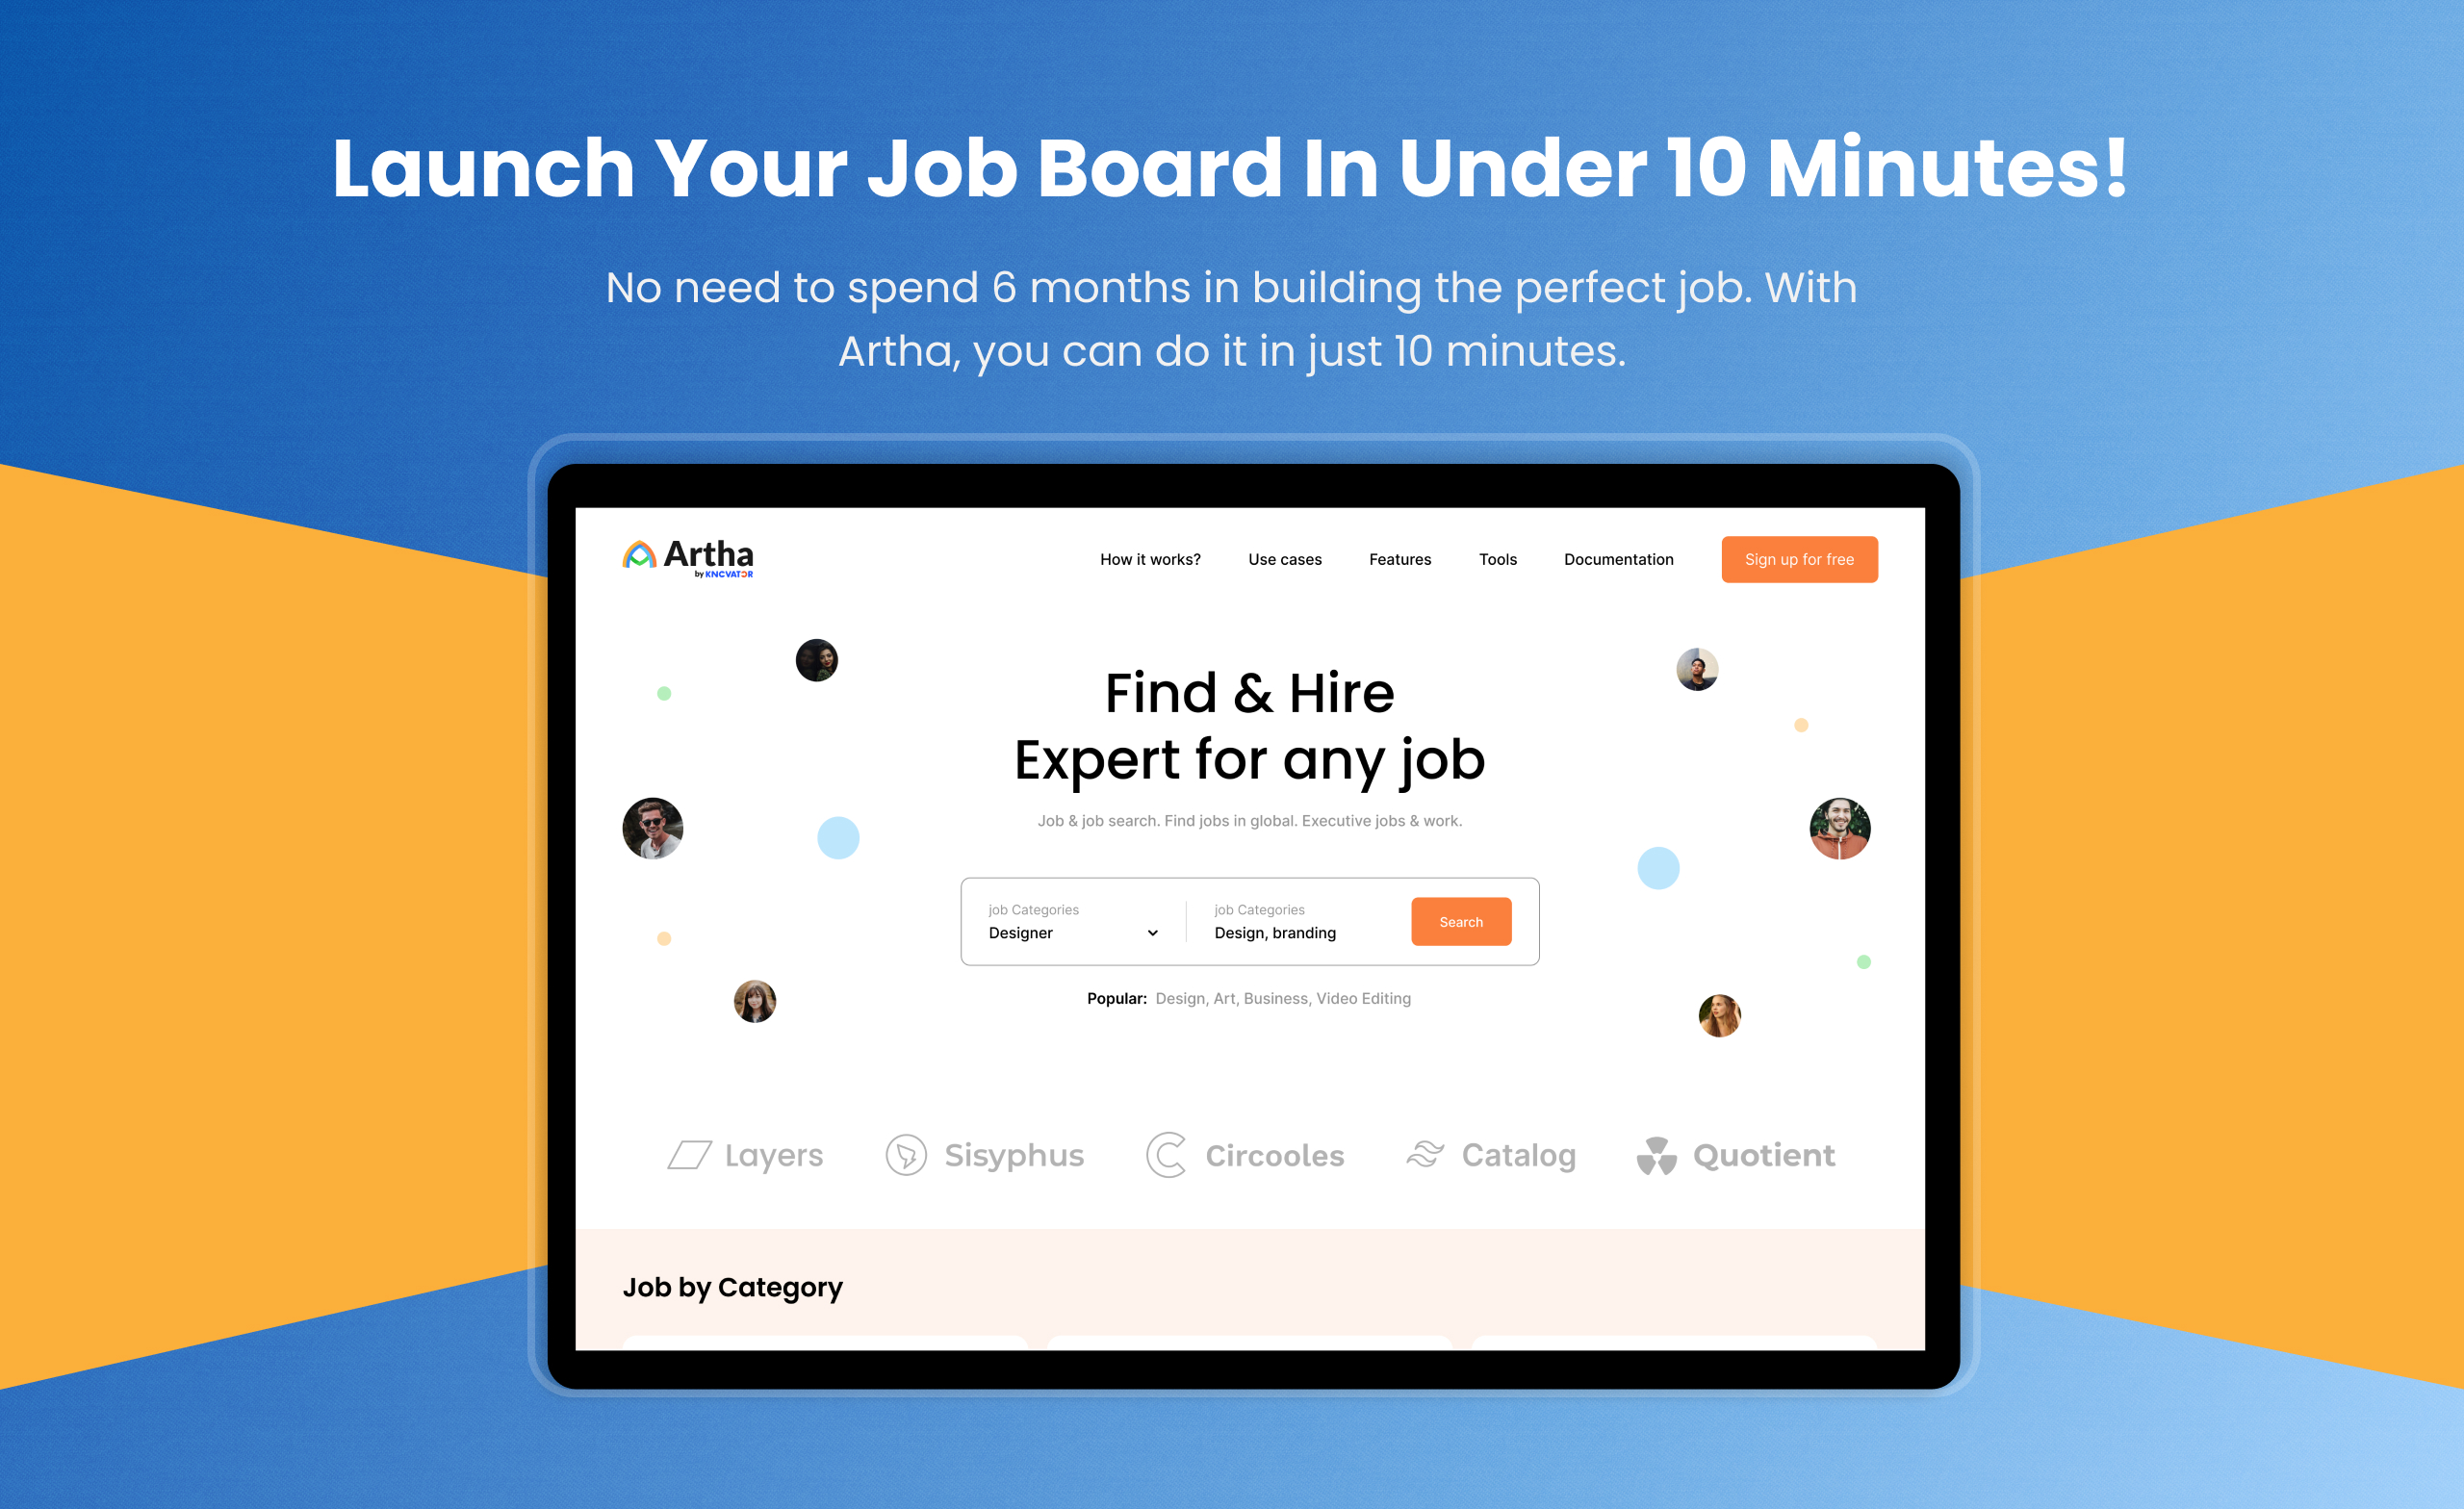 Launch Your Job Board In Under 10 Minutes!
No need to spend 6 months in building the perfect job. With Artha, you can do it in just 10 minutes.